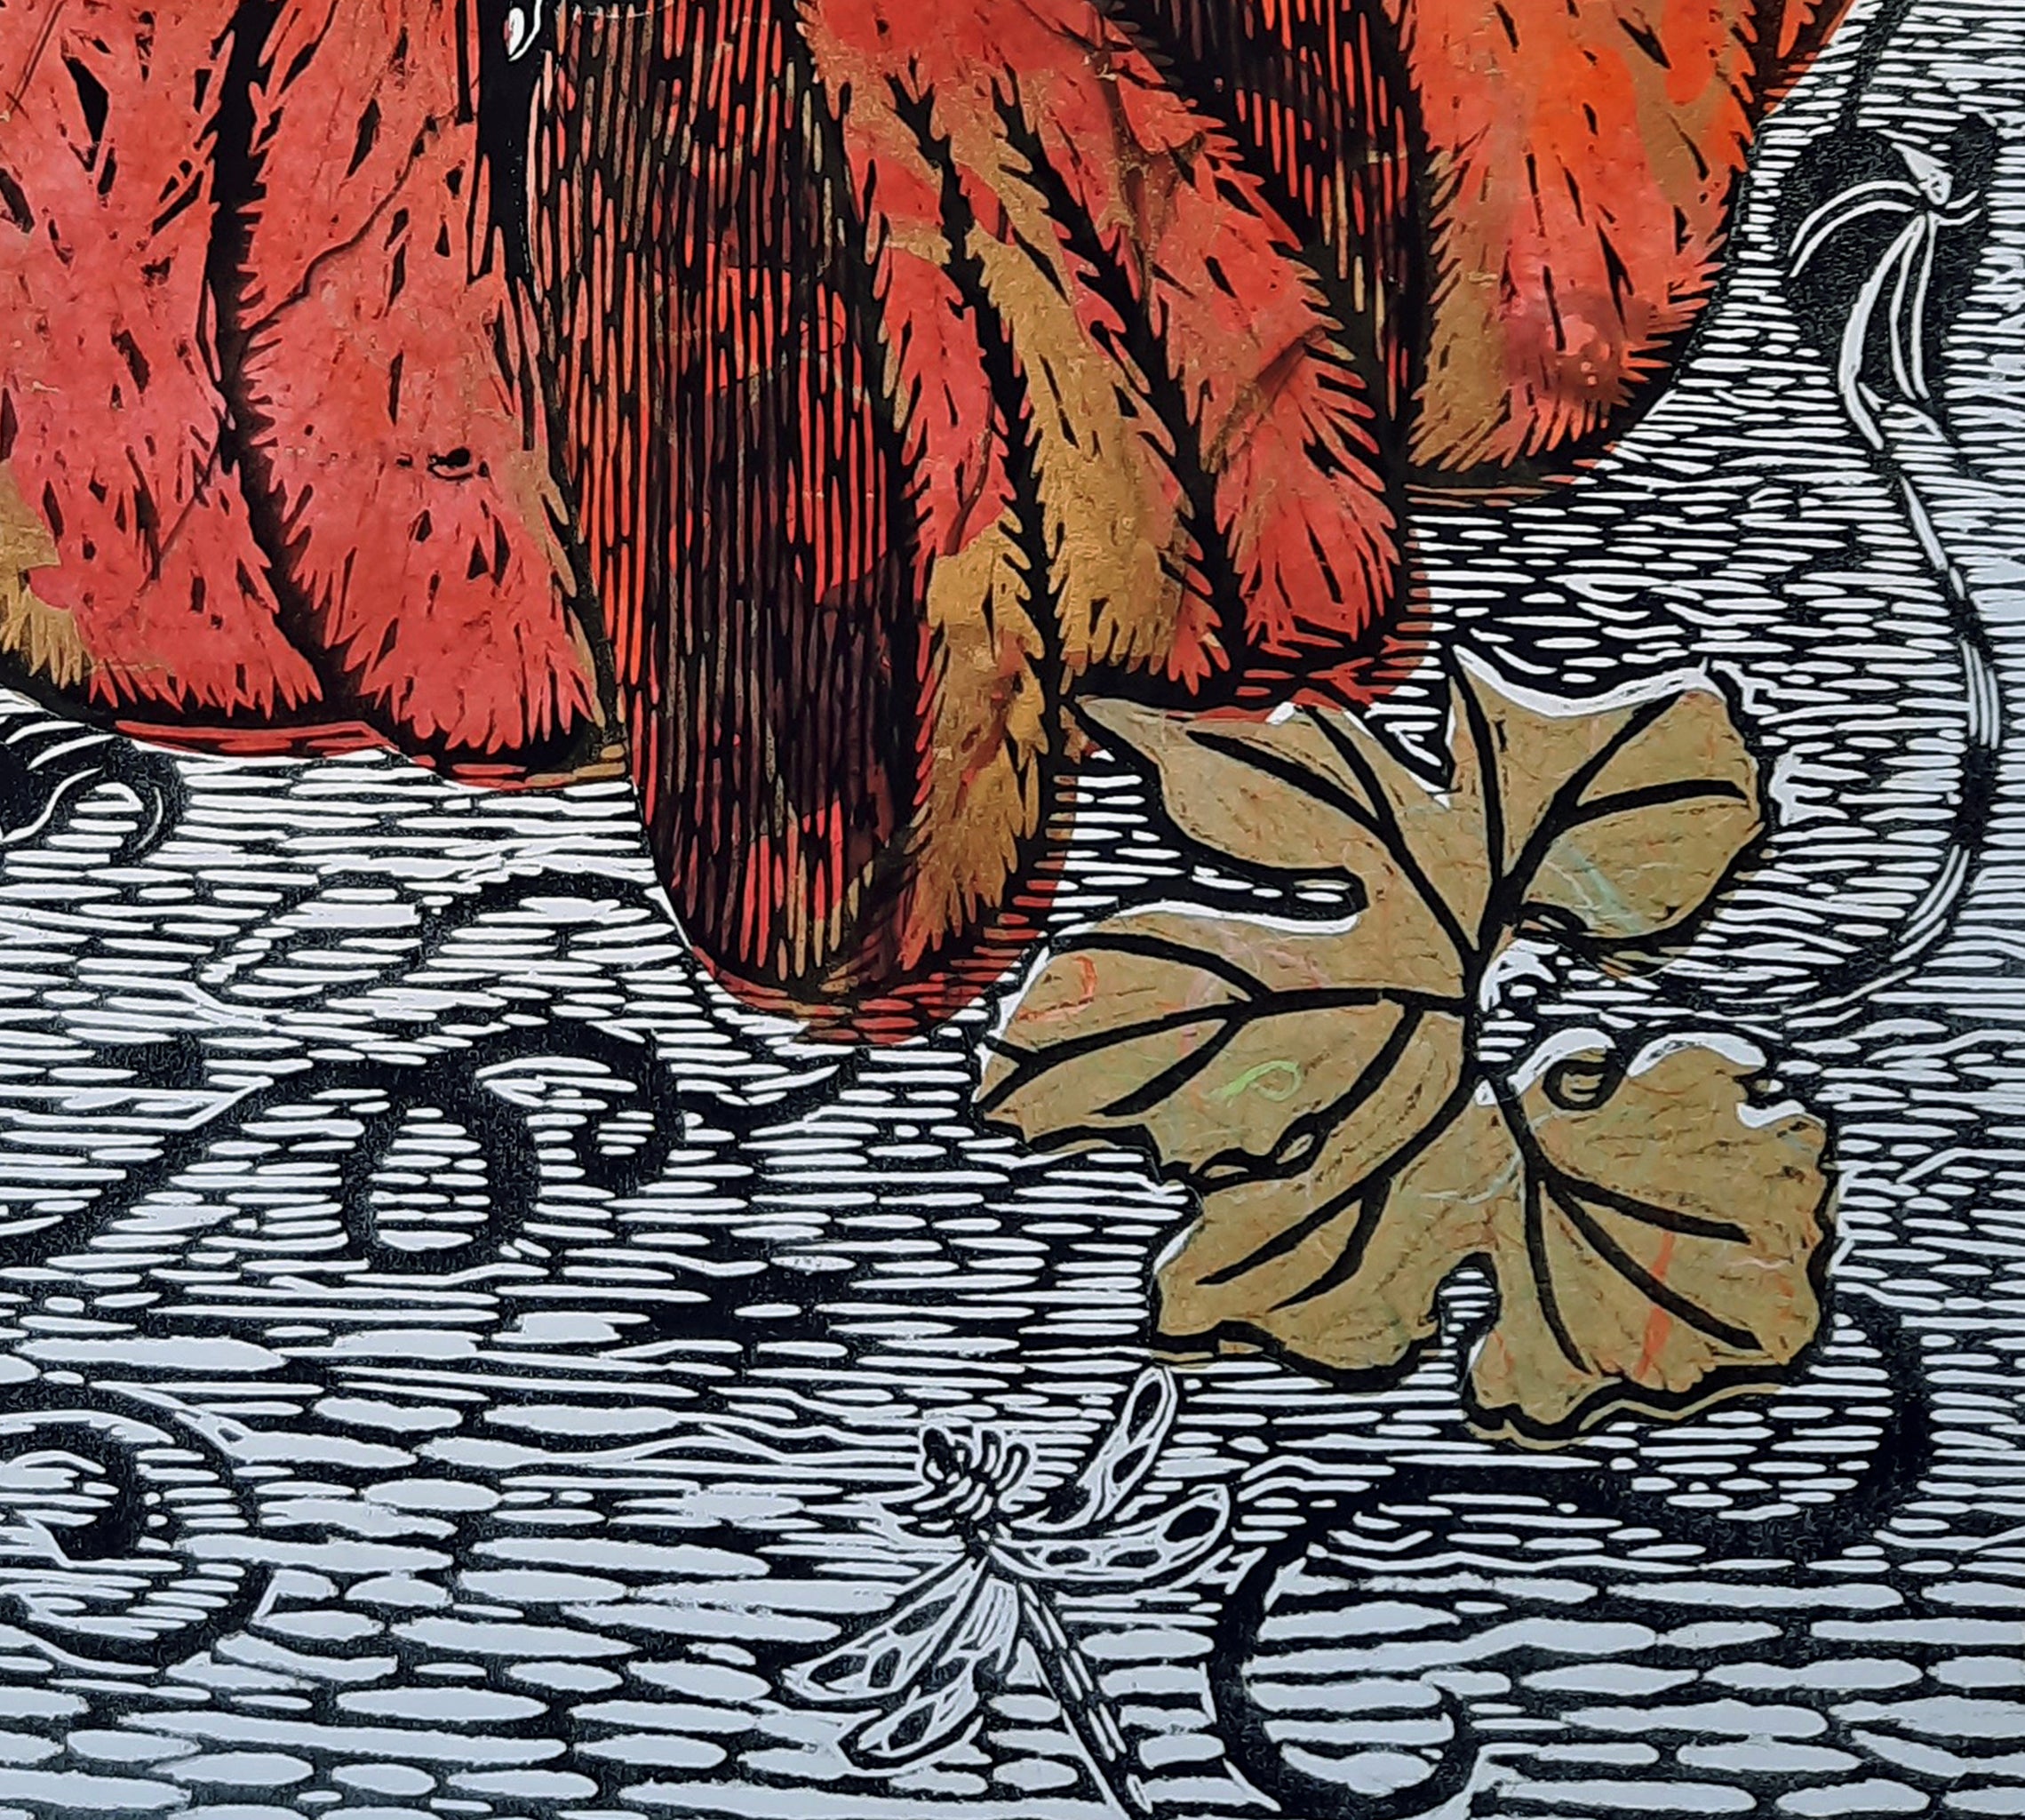 detail 1 of Golden Orange pumpkin with woodcut technique and chine colle collage. One of a kind, size 30hx22w, available for sale unframed by Ouida Touchon